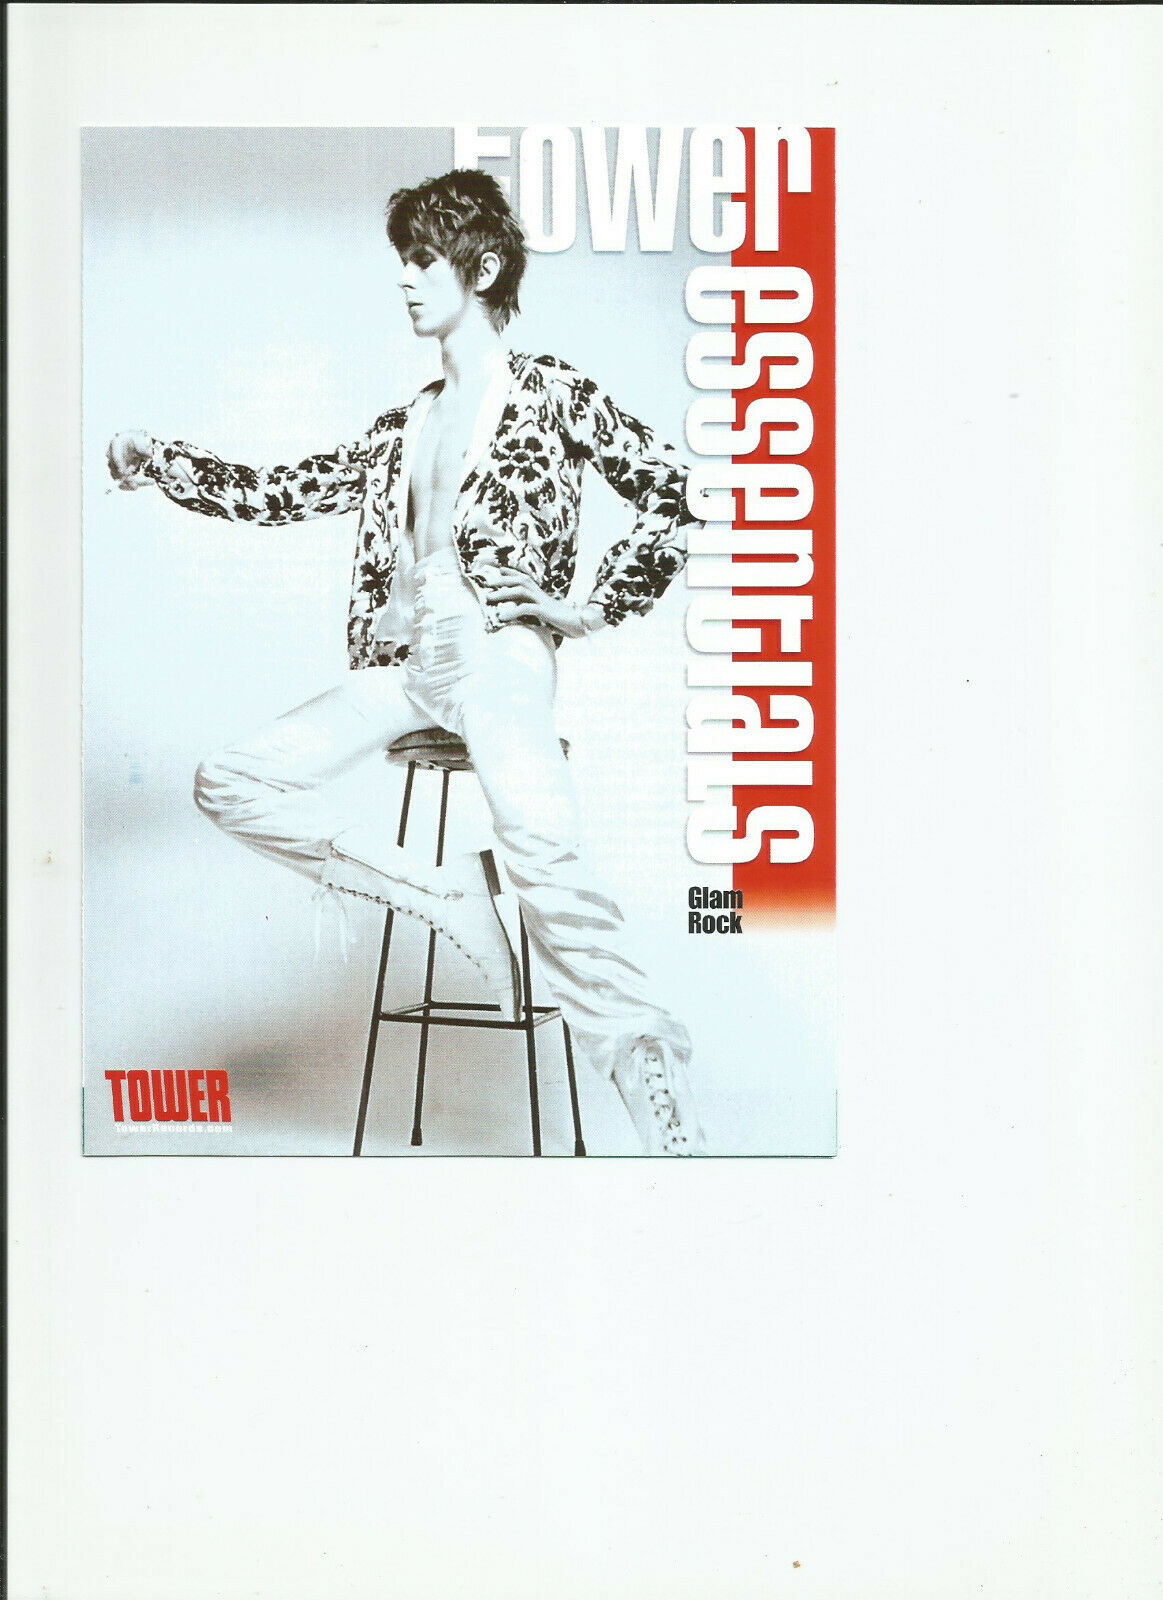 David Bowie And Tower Records The New York Dolls, T-rex Et Al. Promo Flyer Rare!